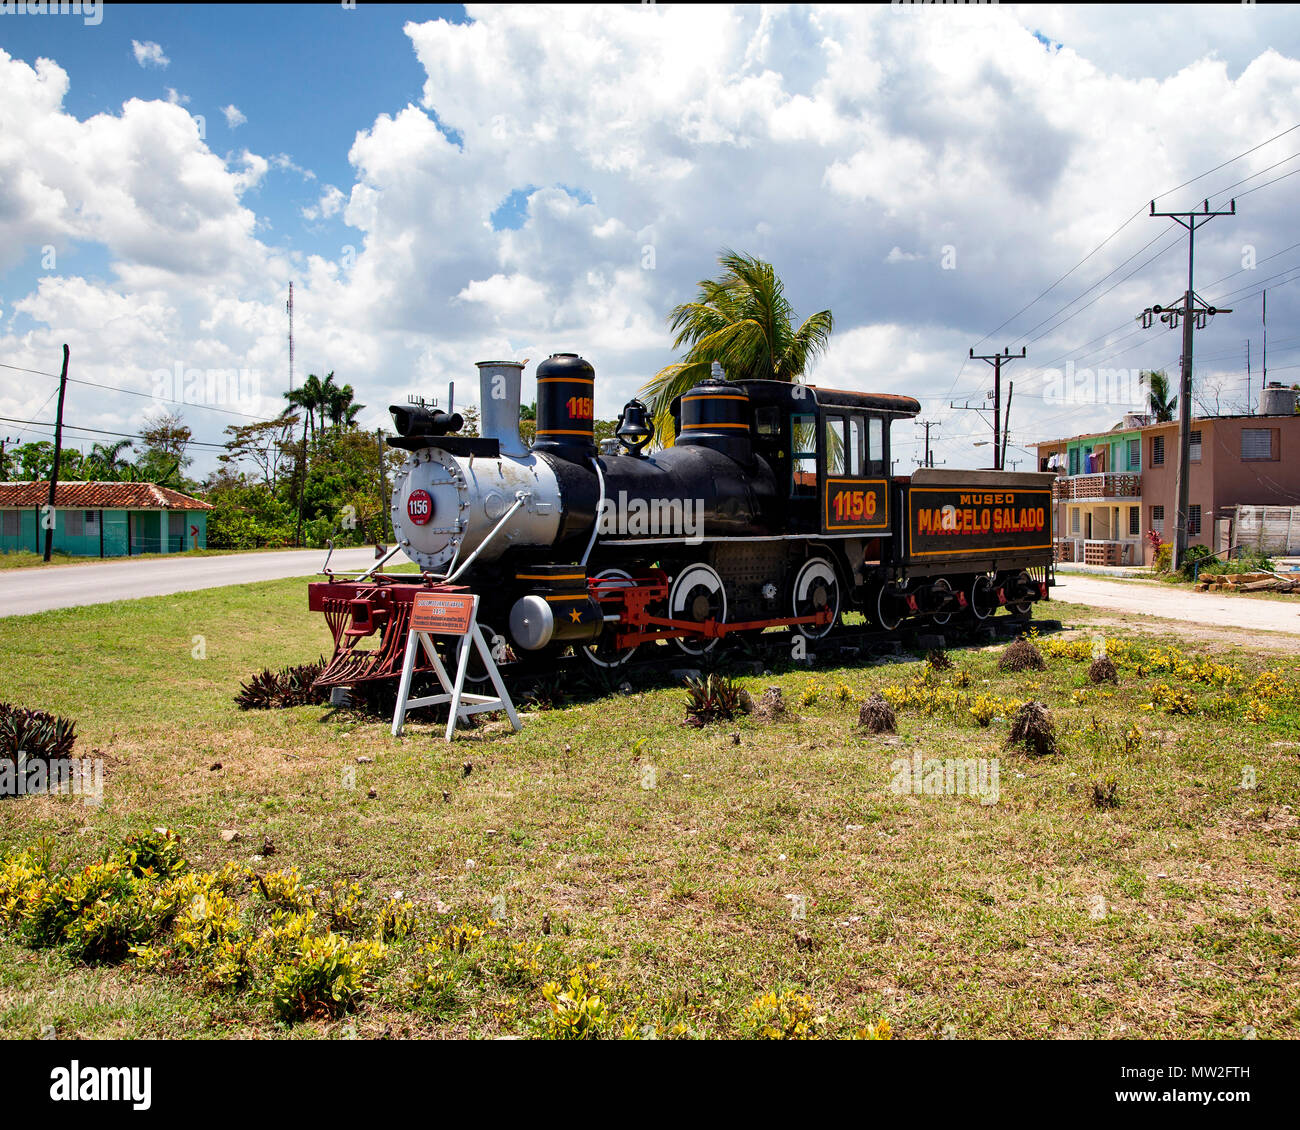 One of the 4-6-0 steam locomotives that used to work the Sugar Cane traffic outside the steam and sugar mill museum near Remedios, Cuba Stock Photo